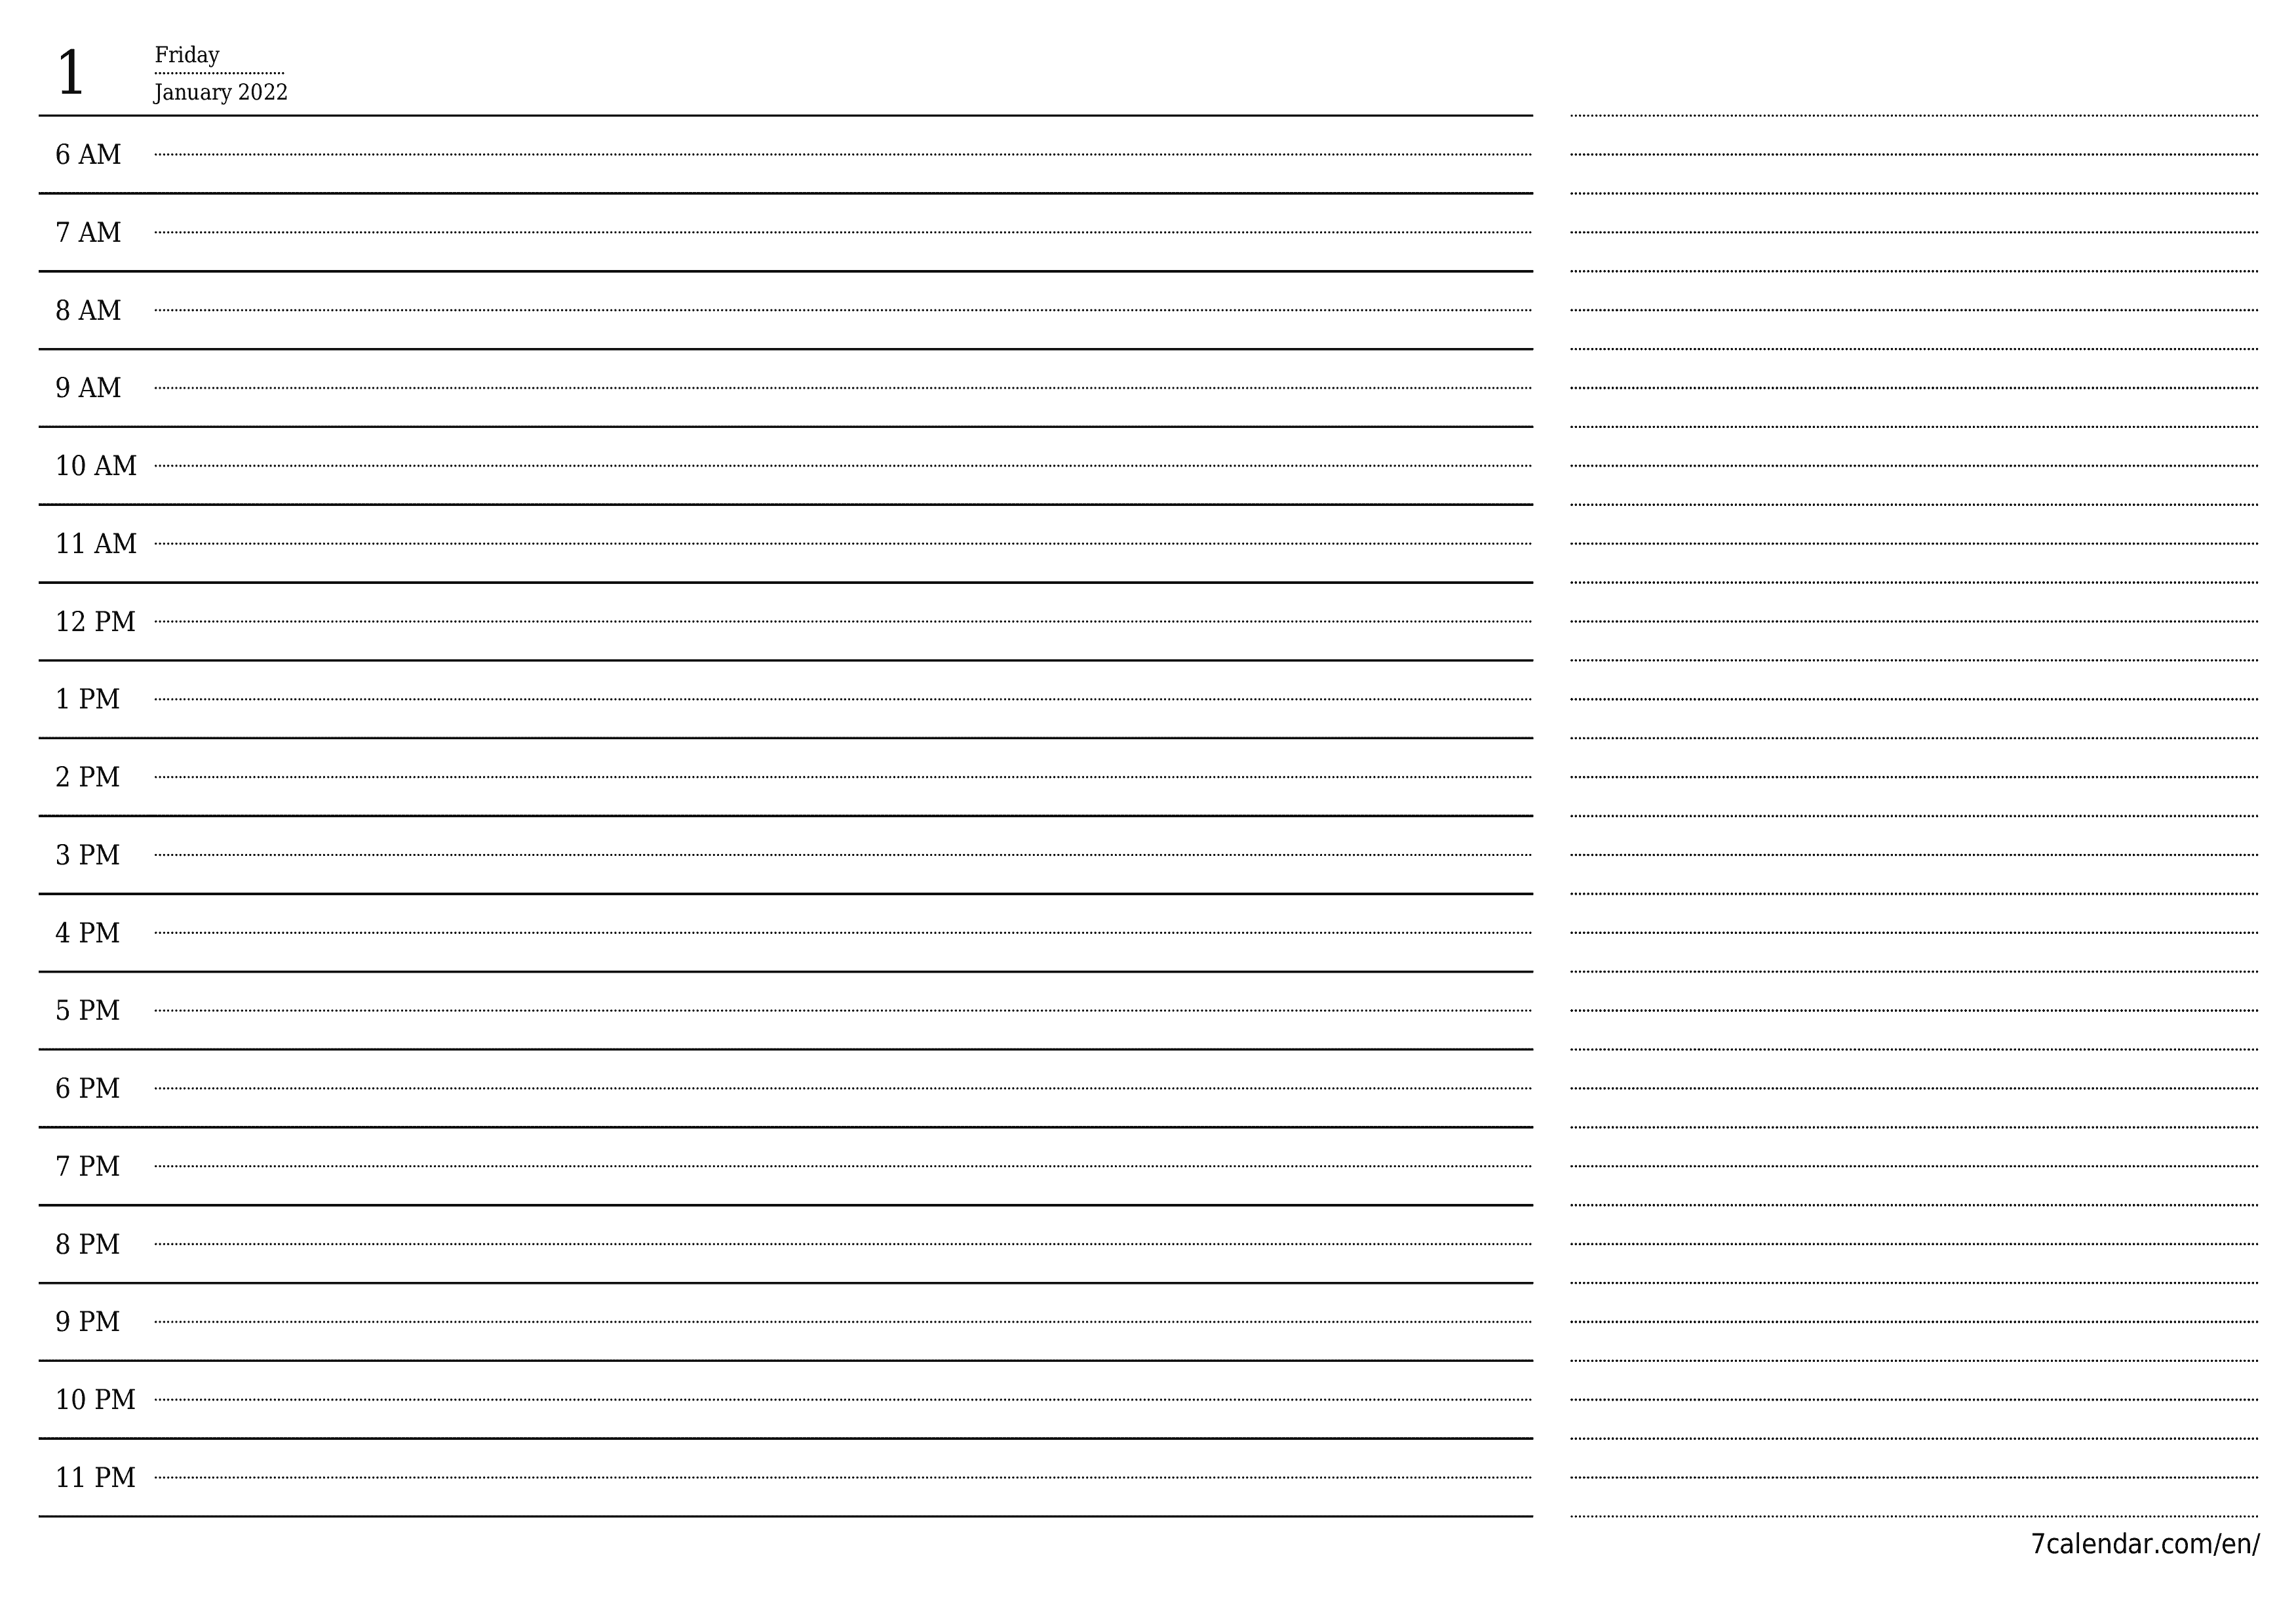 Blank daily printable calendar and planner for day January 2022 with notes, save and print to PDF PNG English - 7calendar.com